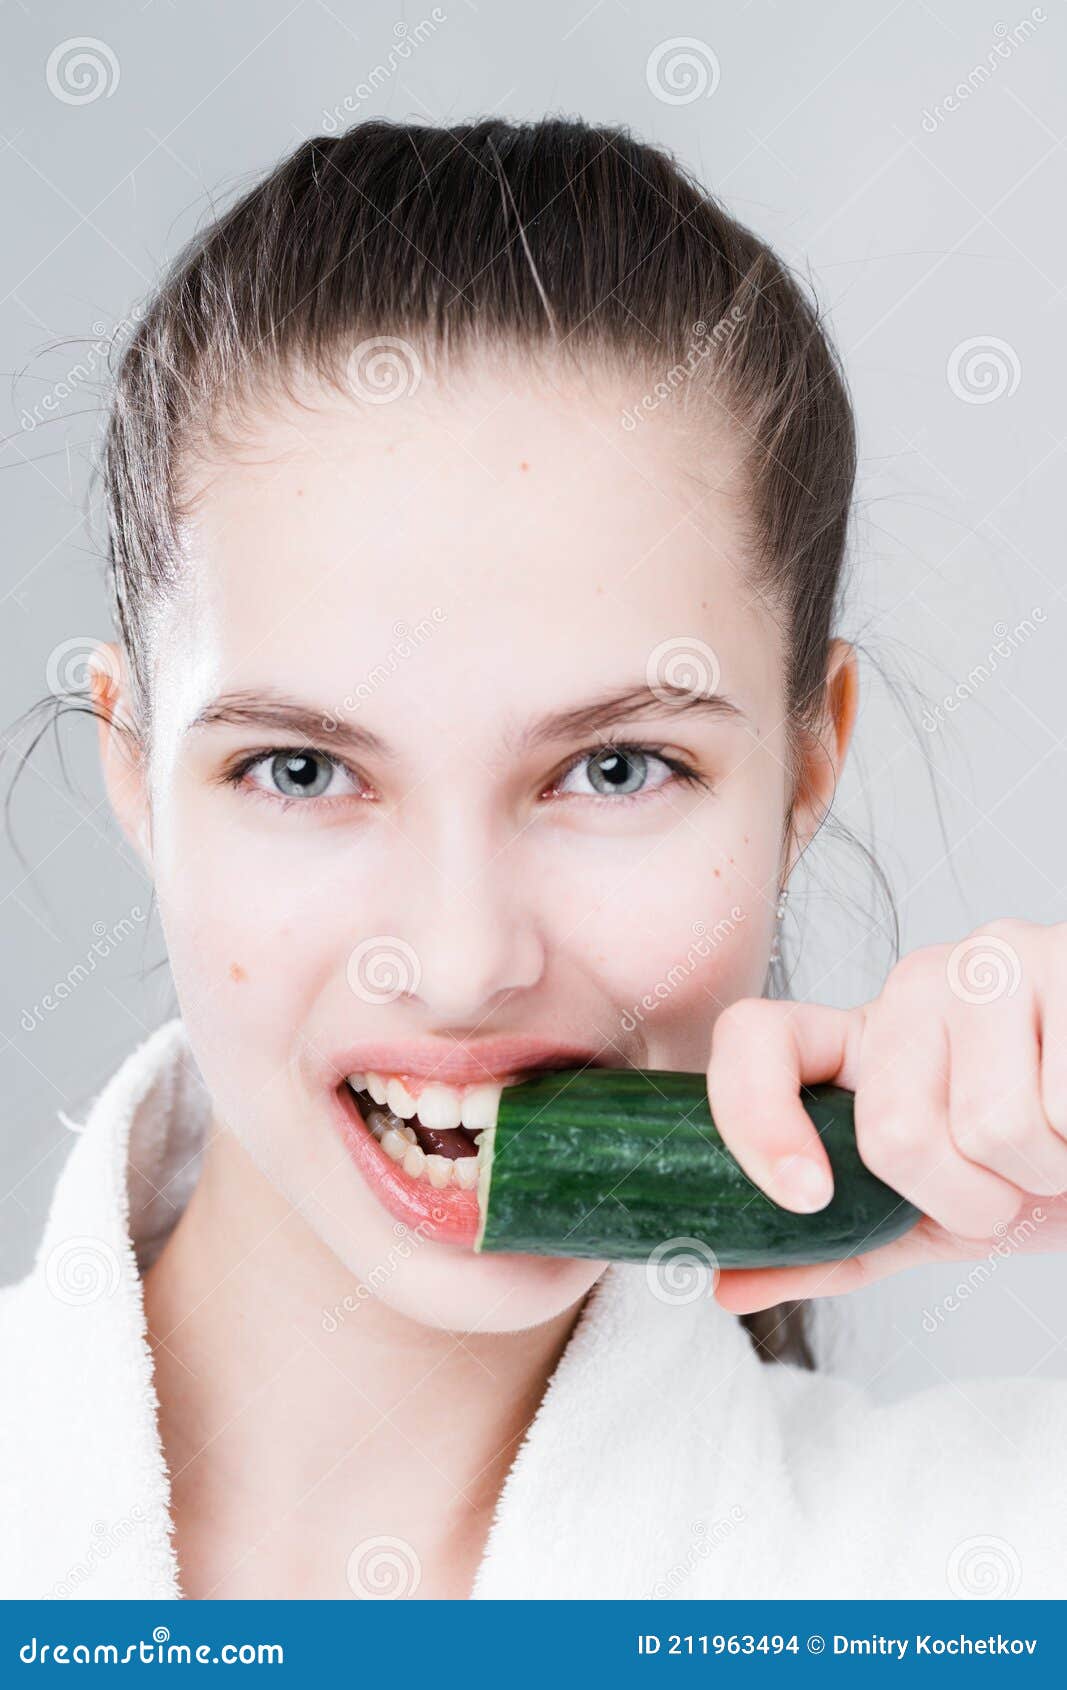 Portrait Of A Beautiful Woman Holding A Cucumber And Biting It On A Gray Ba...